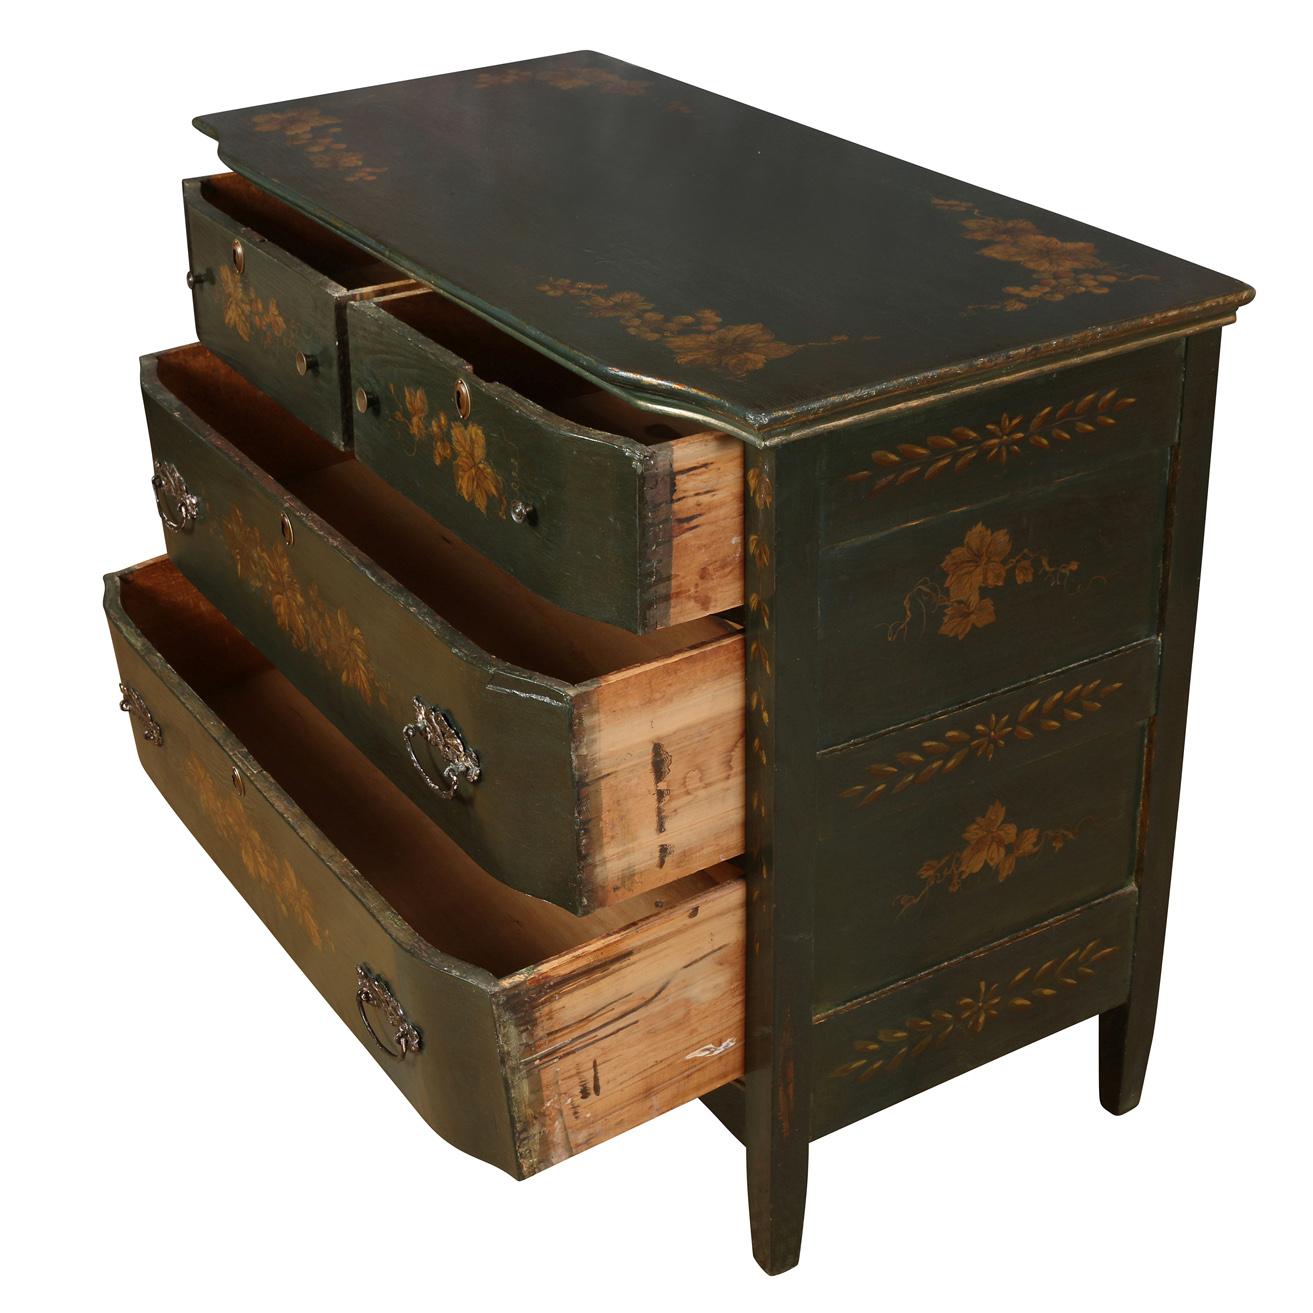 A charming dresser with two small drawers and two large drawers, raised on tapered legs.  The dresser is painted in a dark green lacquer and decorated with a lovely floral motif on top, front and sides.  The angled top and drawers and the scalloped